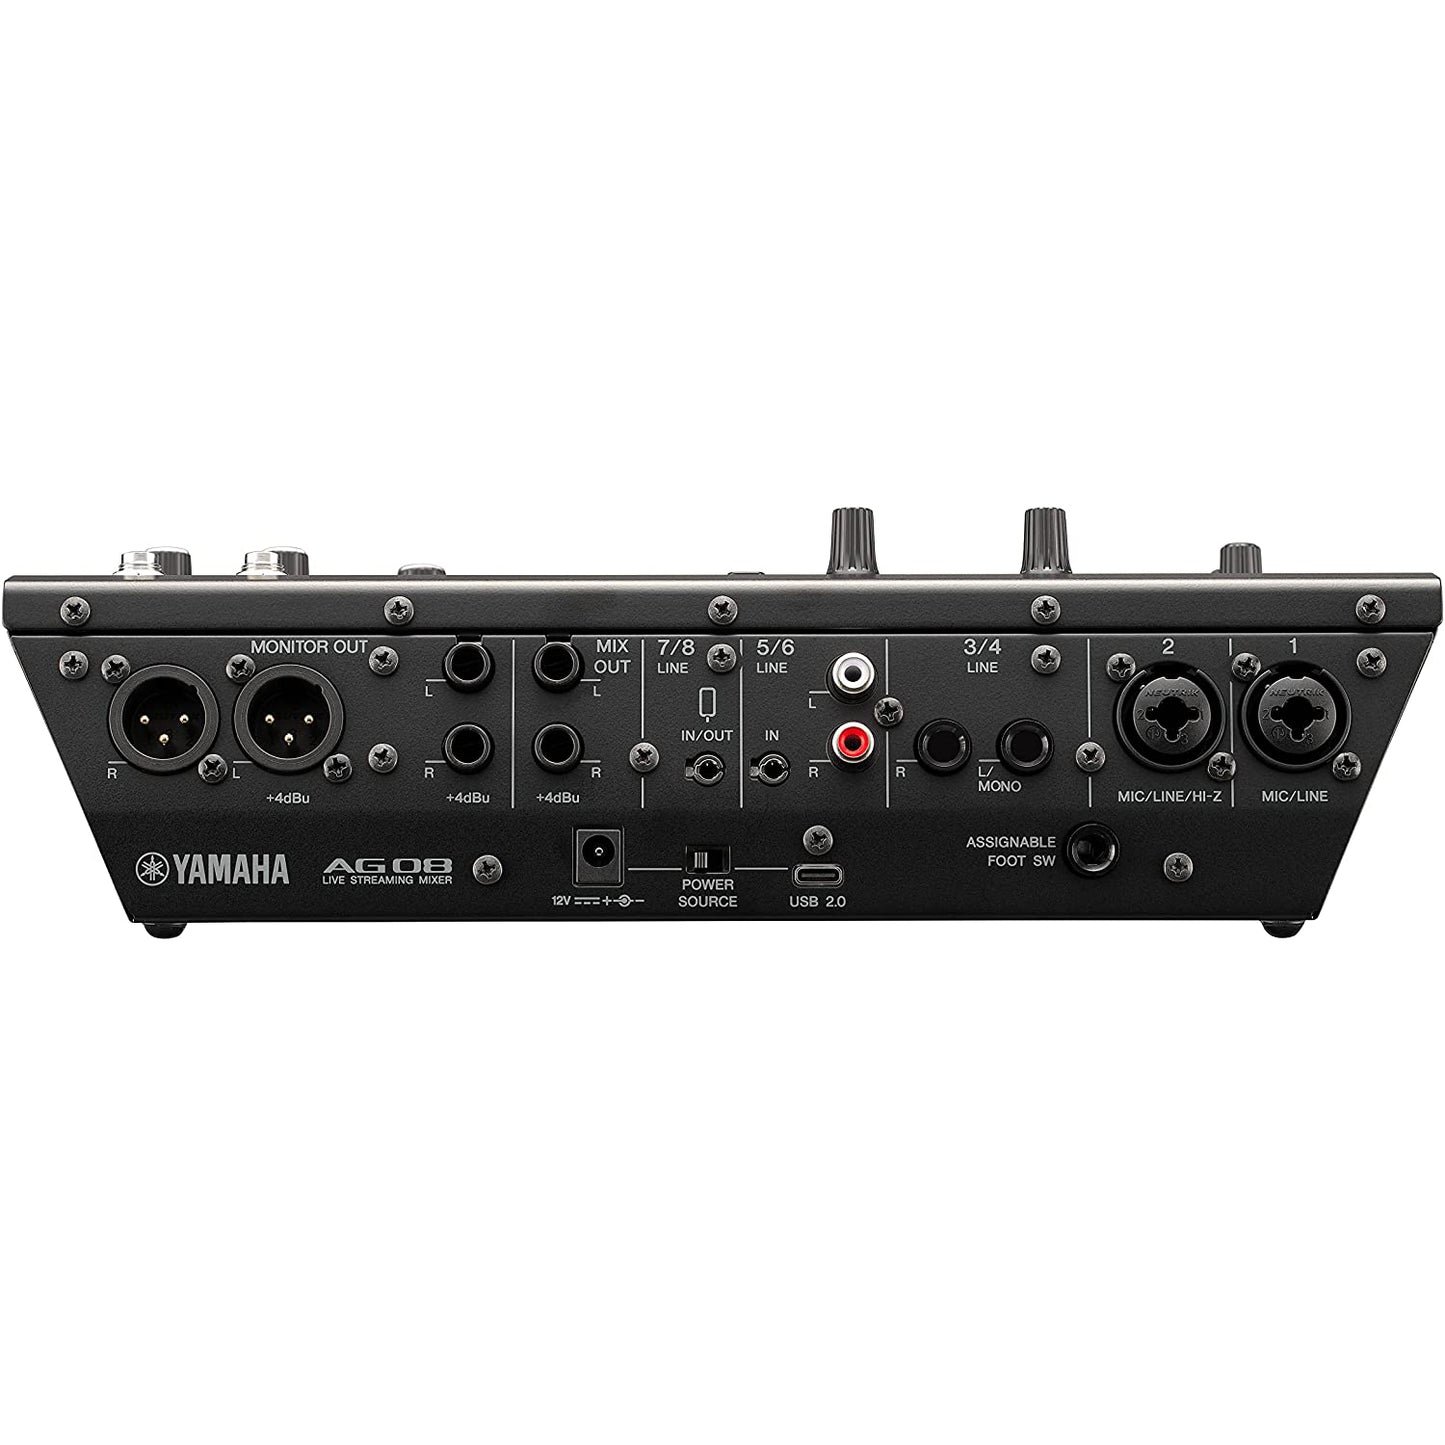 Yamaha AG08 All-In-One Live Streaming Mixer - Black